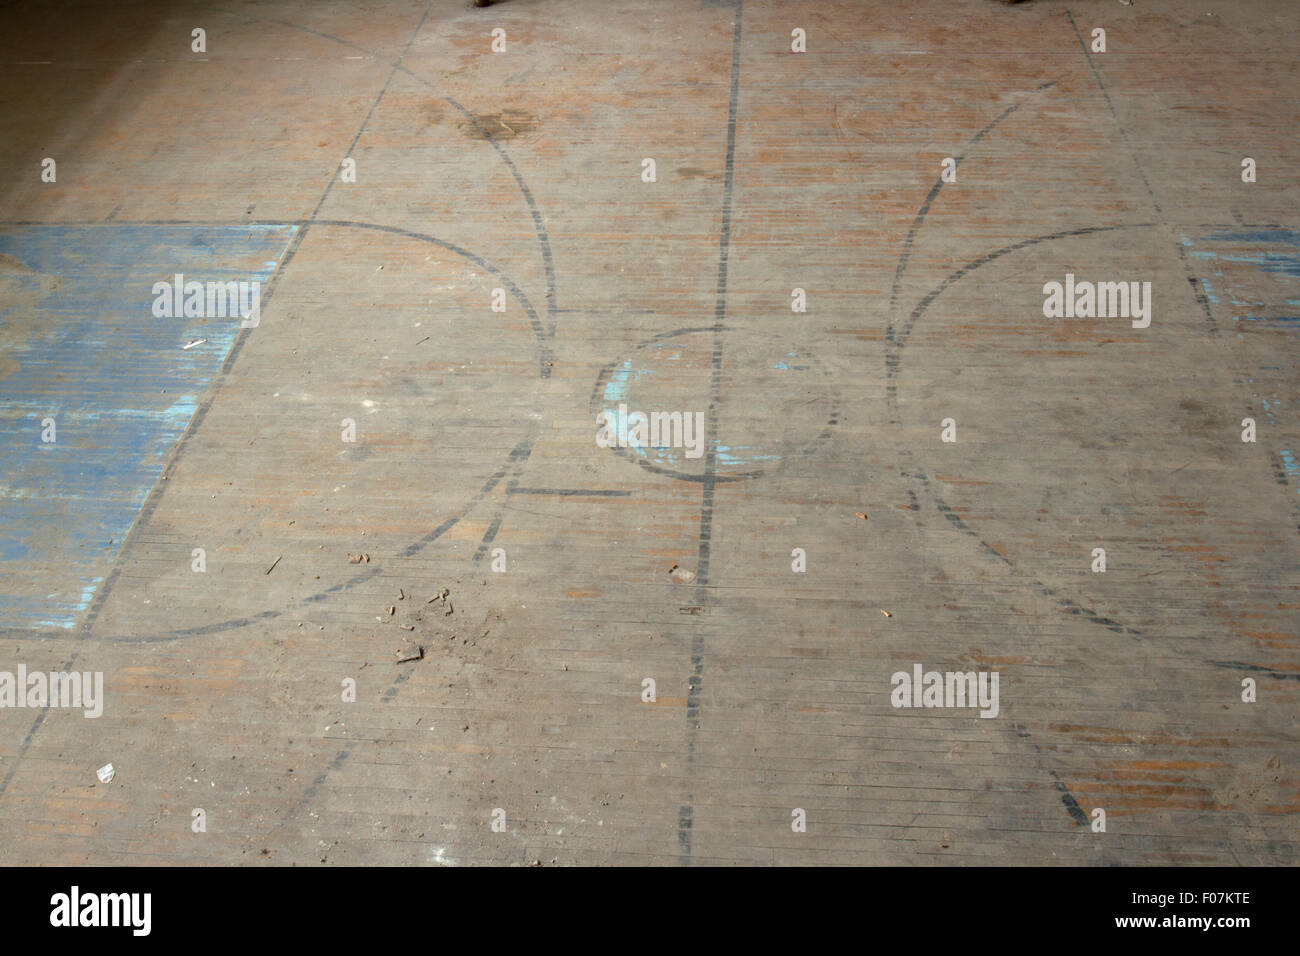 Wooden Court For Basketball In Old School Gym Stock Photo